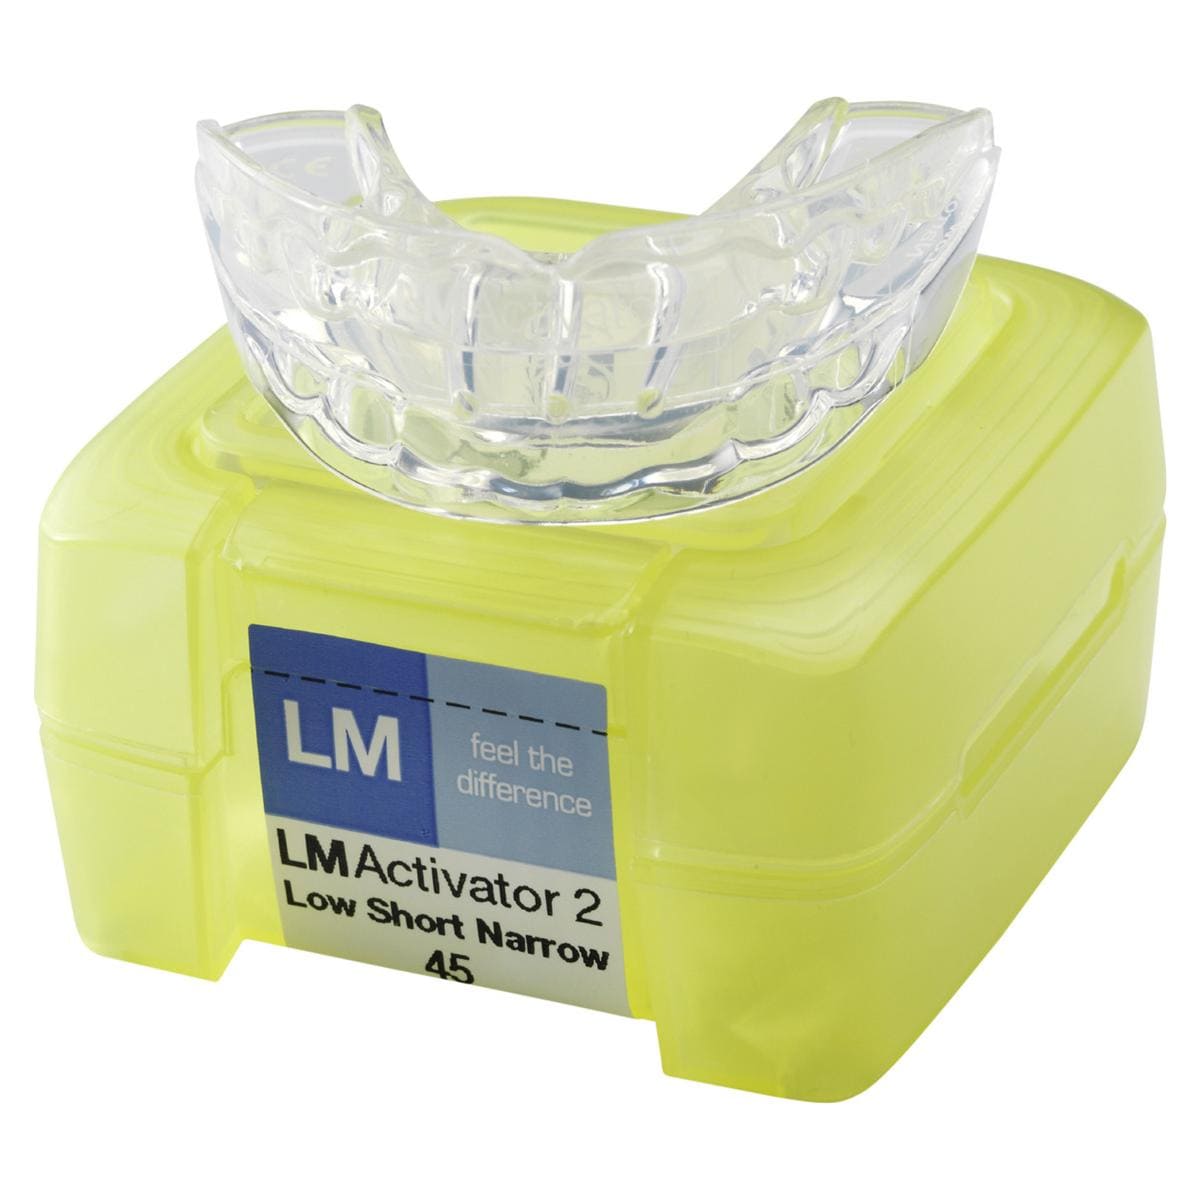 LM Activator 2 Low Short - Narrow - Size 40 (94240LSN)